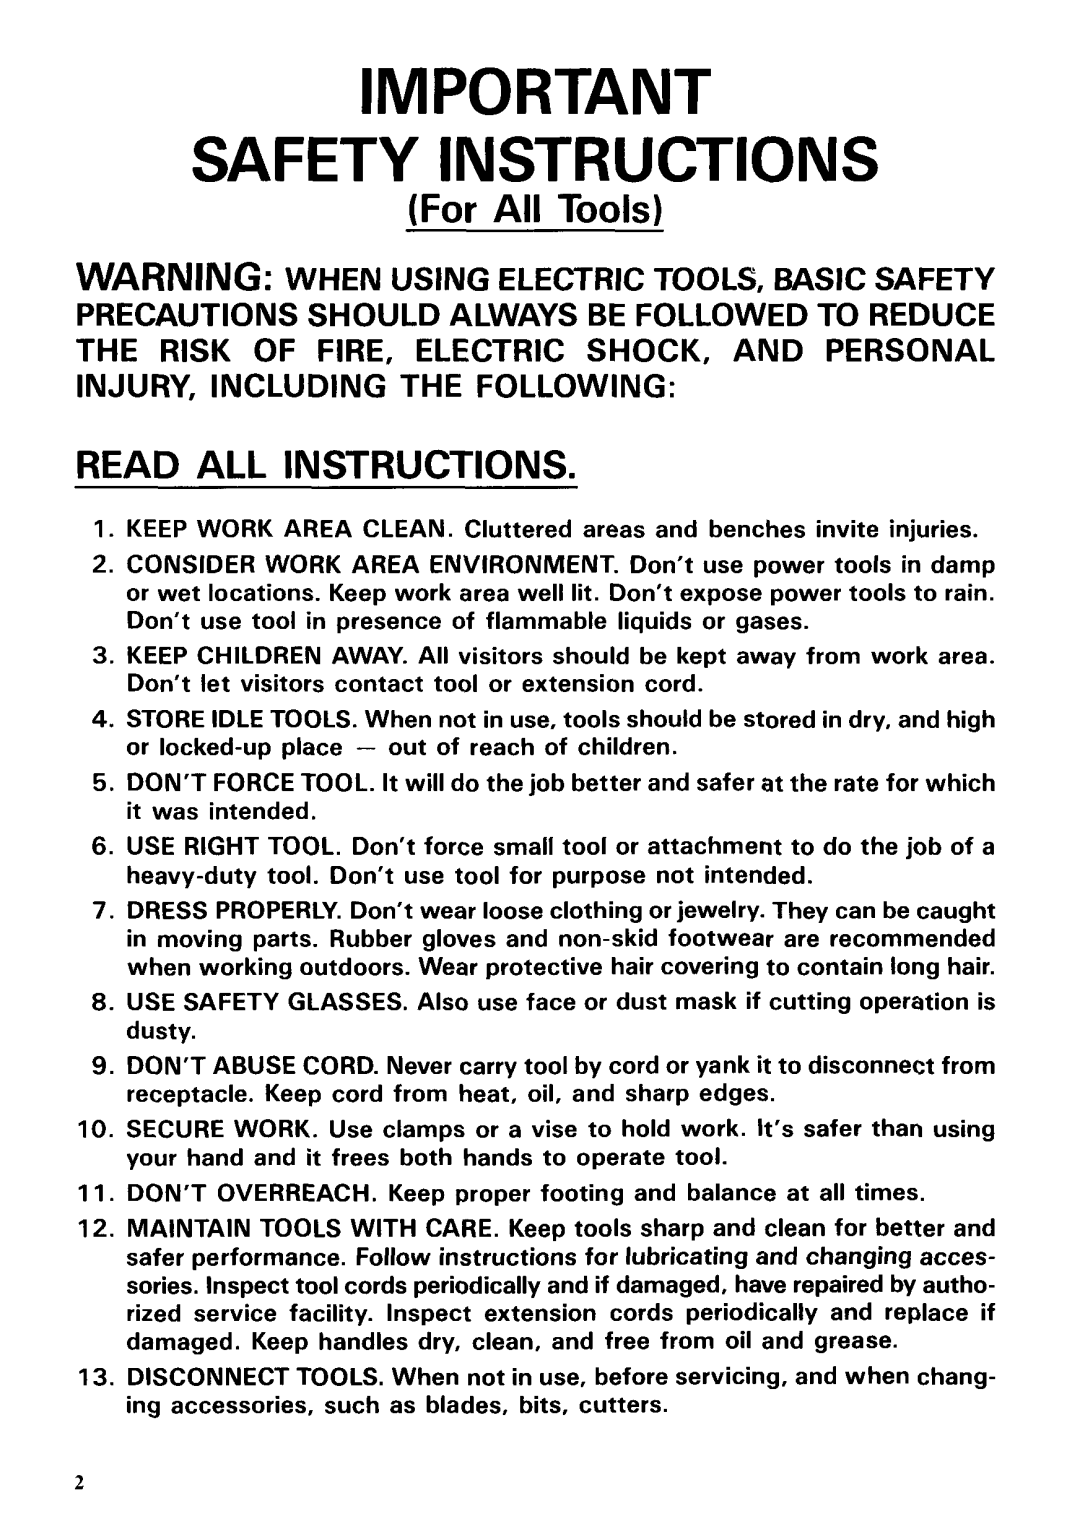 Makita 4399DW specifications Read All Instructions, Safety Instructions, For All Tools 